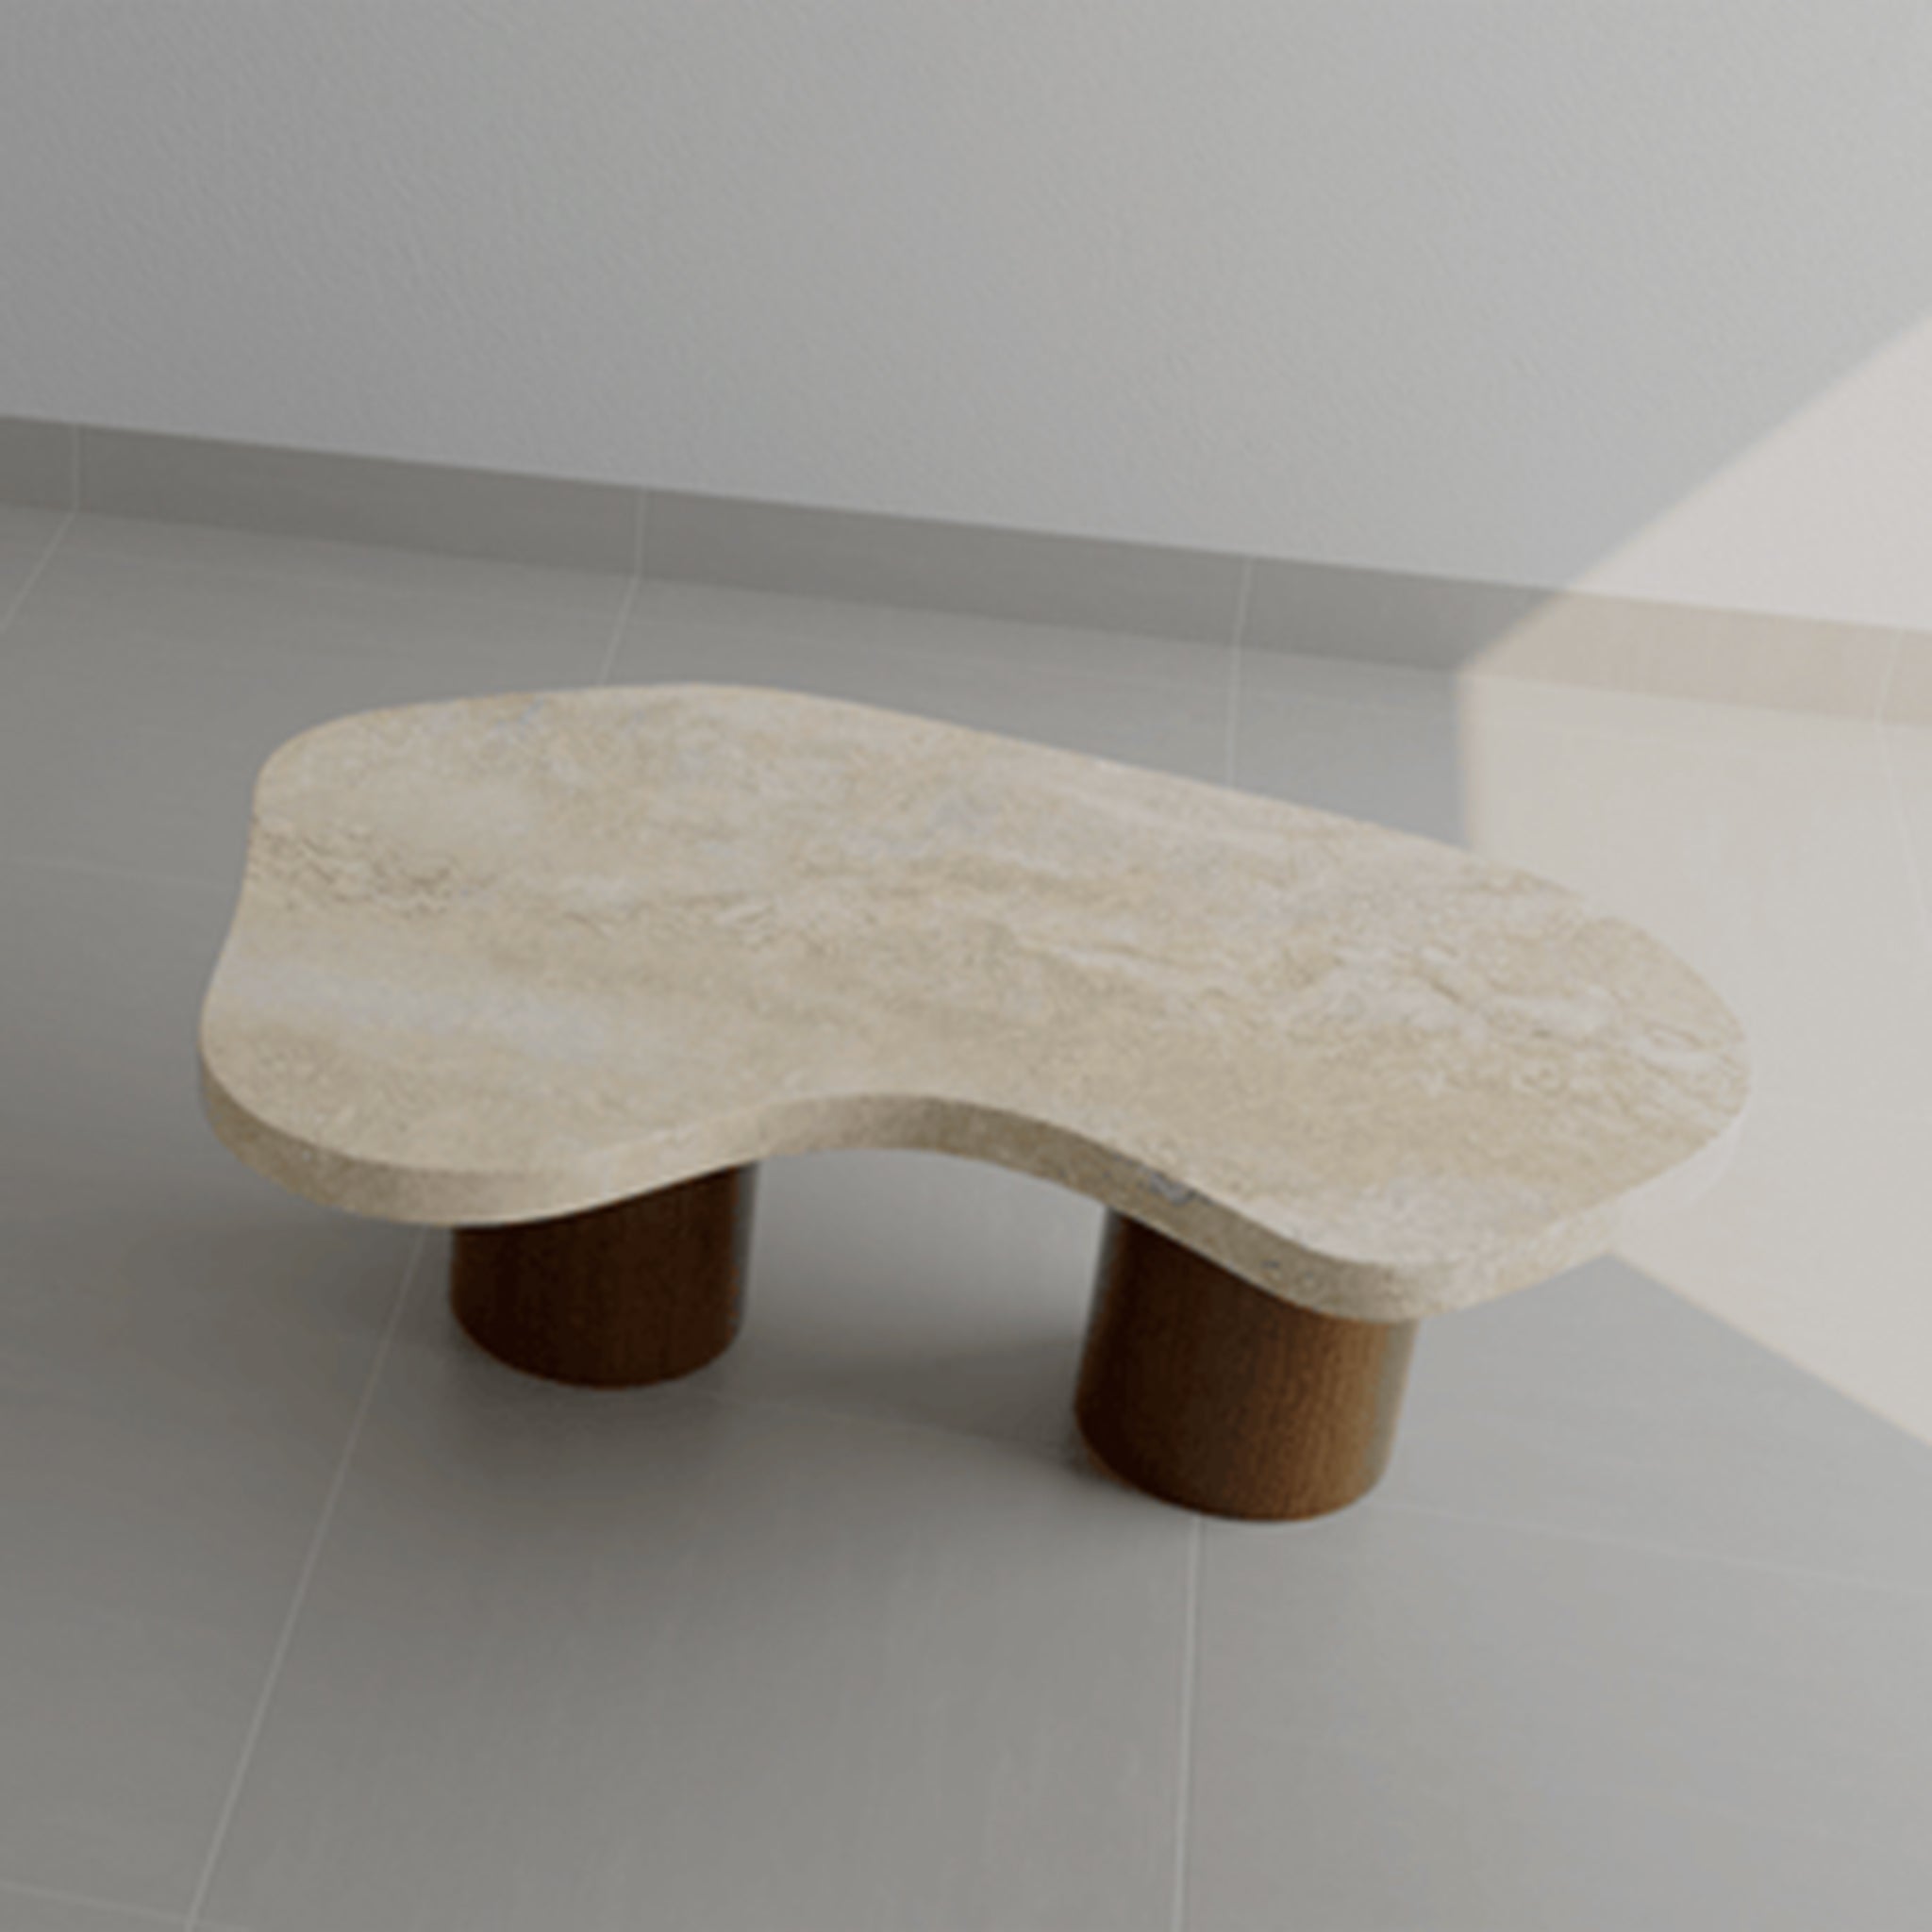 Looking for a modern coffee table? The Eliza Coffee Table offers clean lines and style.